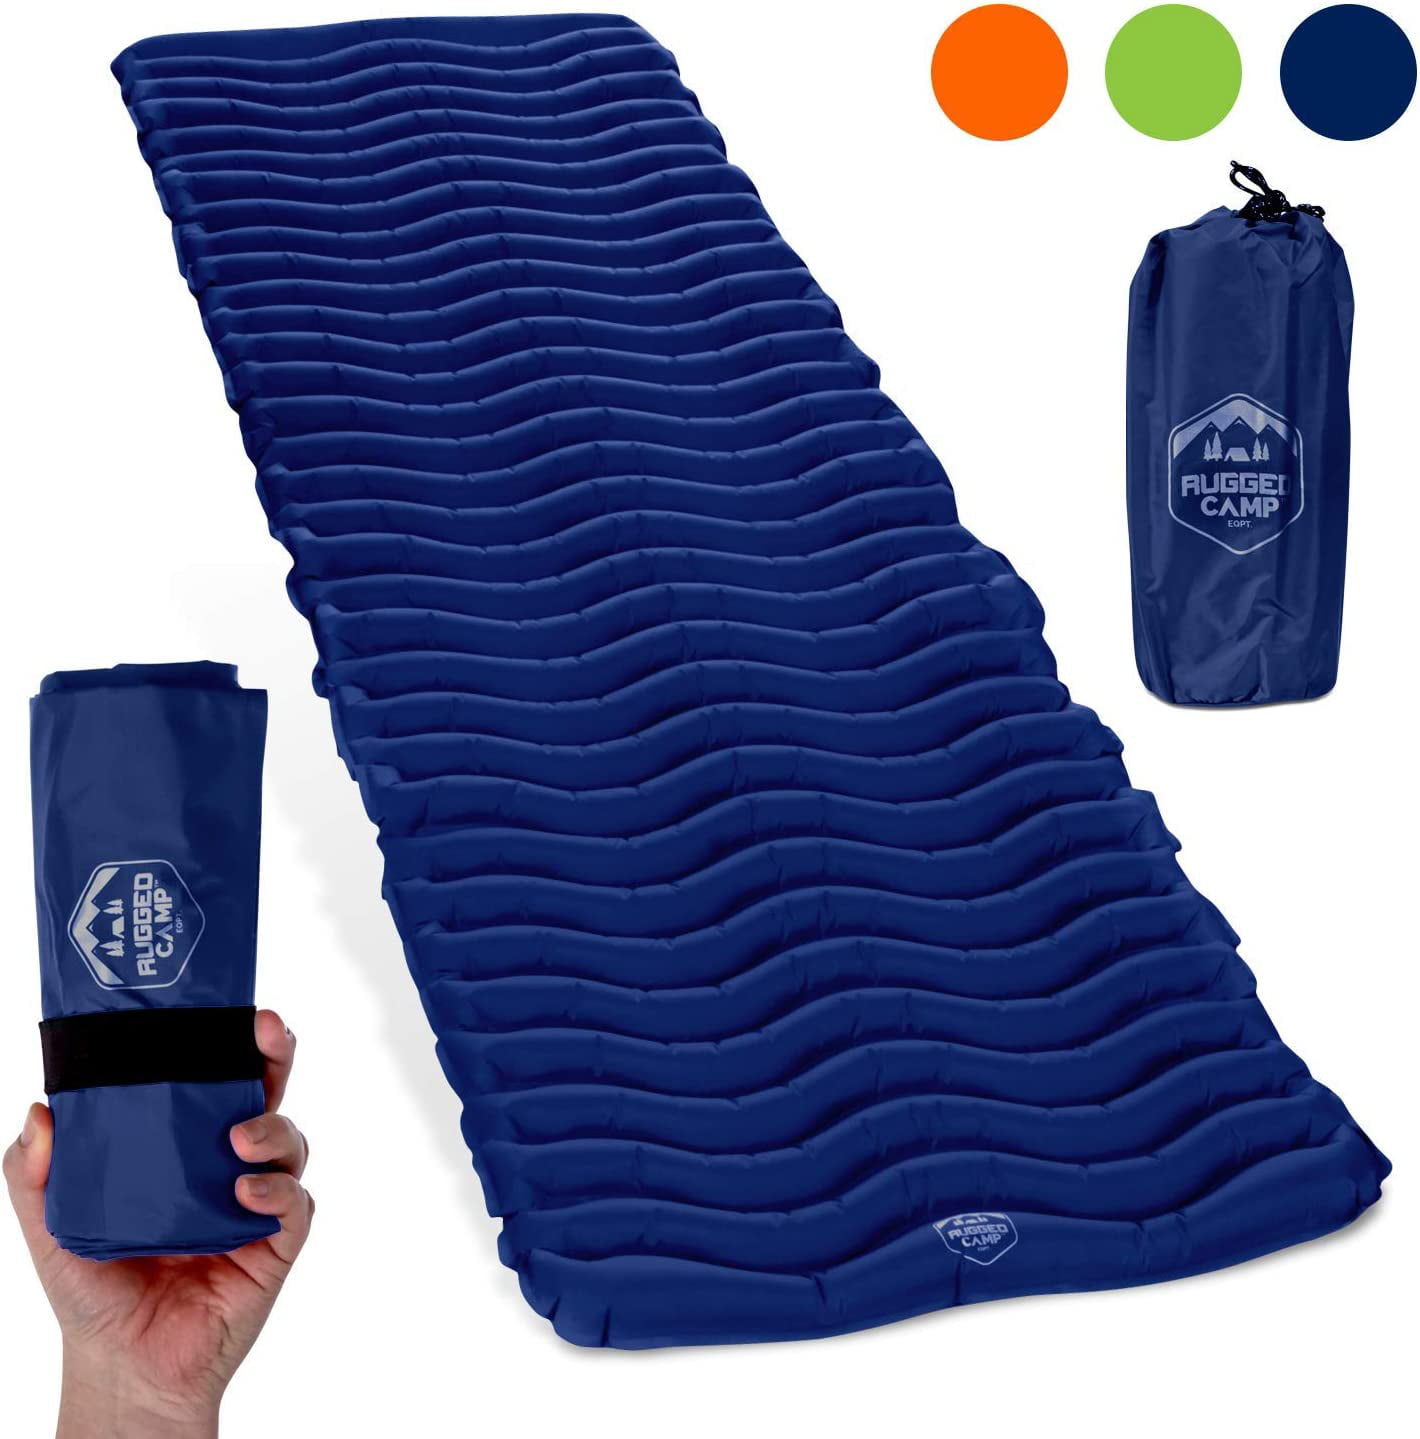 Compact and Comfortable Camp Air Mattress Lightweight Backpacking Sleeping Pad for Camping Ultralight Inflatable Inflating Sleep Mat Hiking or Travel 